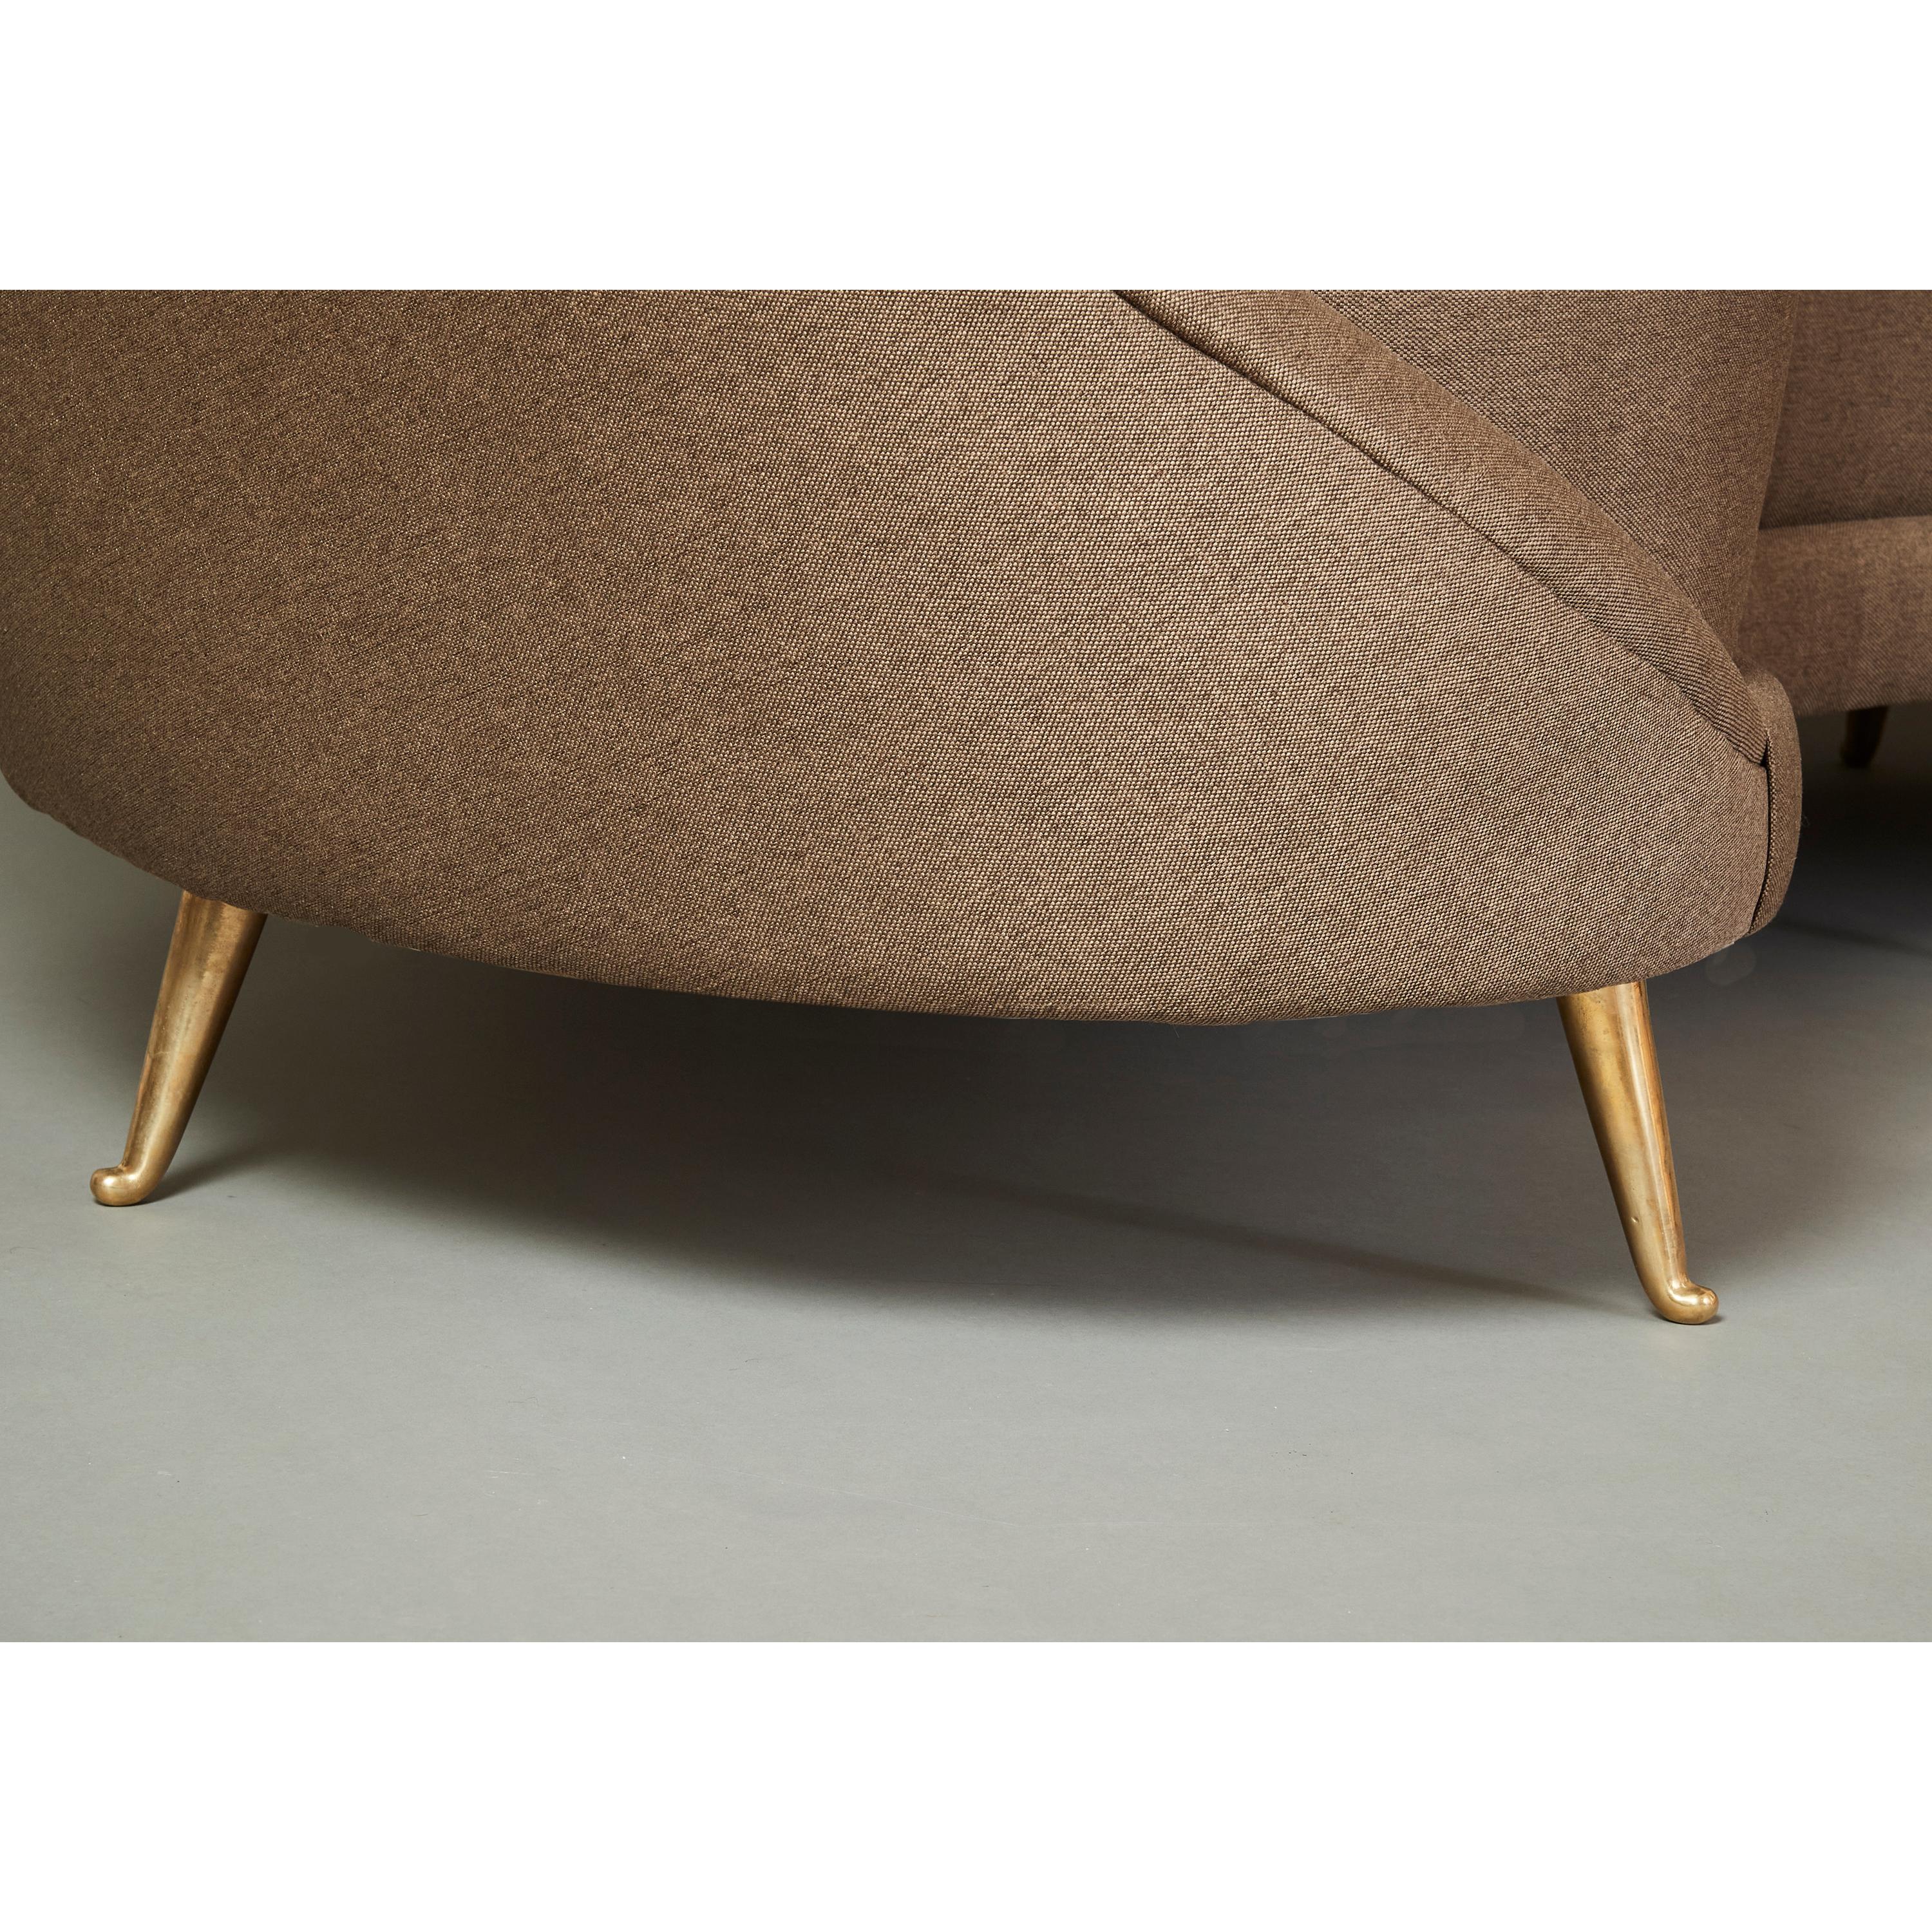 Federico Munari Curved Boomerang Sofa with Polished Brass Legs, Italy 1950's For Sale 8